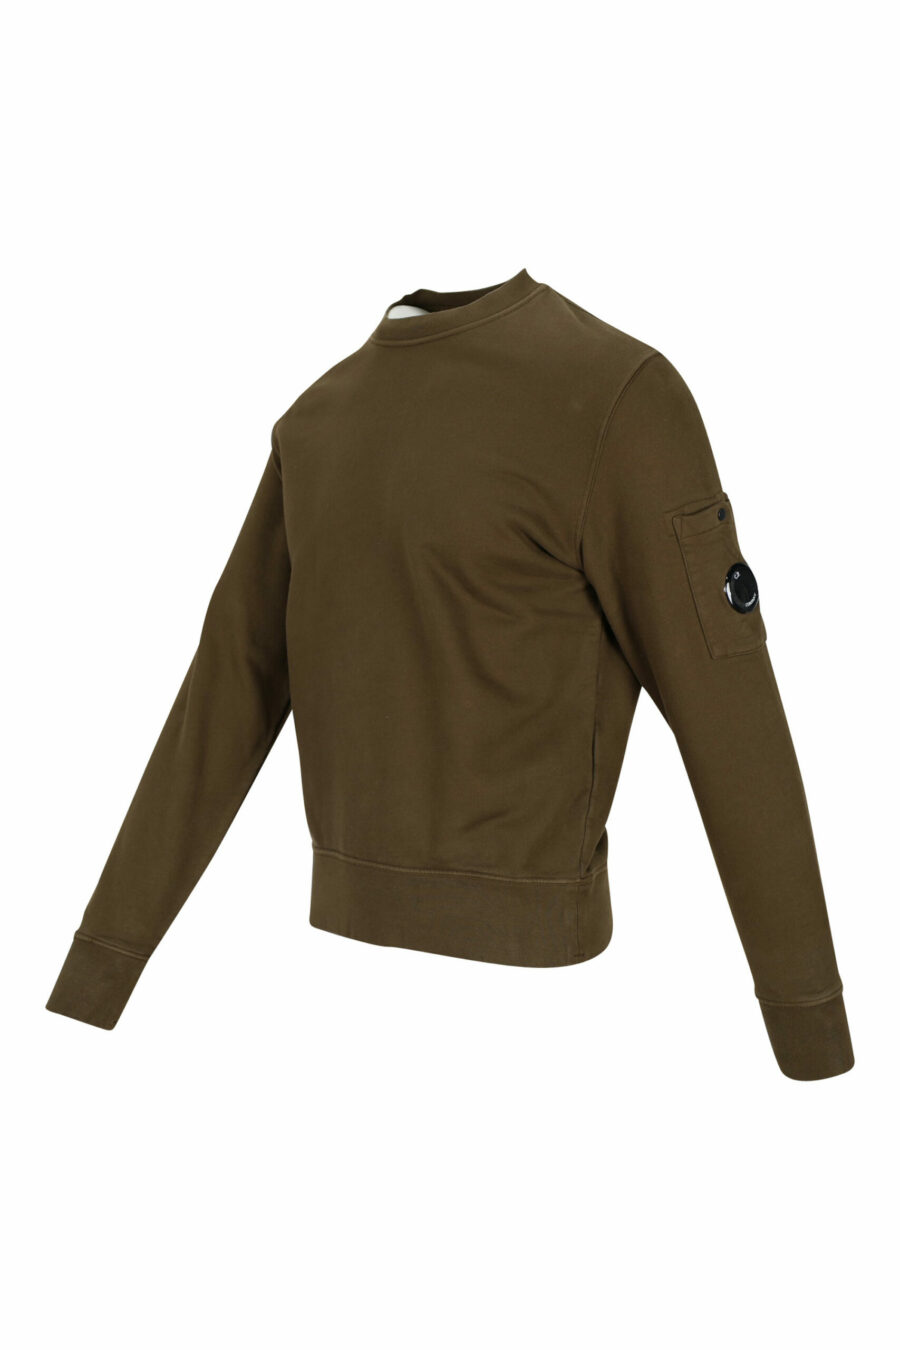 Military green sweatshirt with side logo lens - 7620943598582 1 scaled